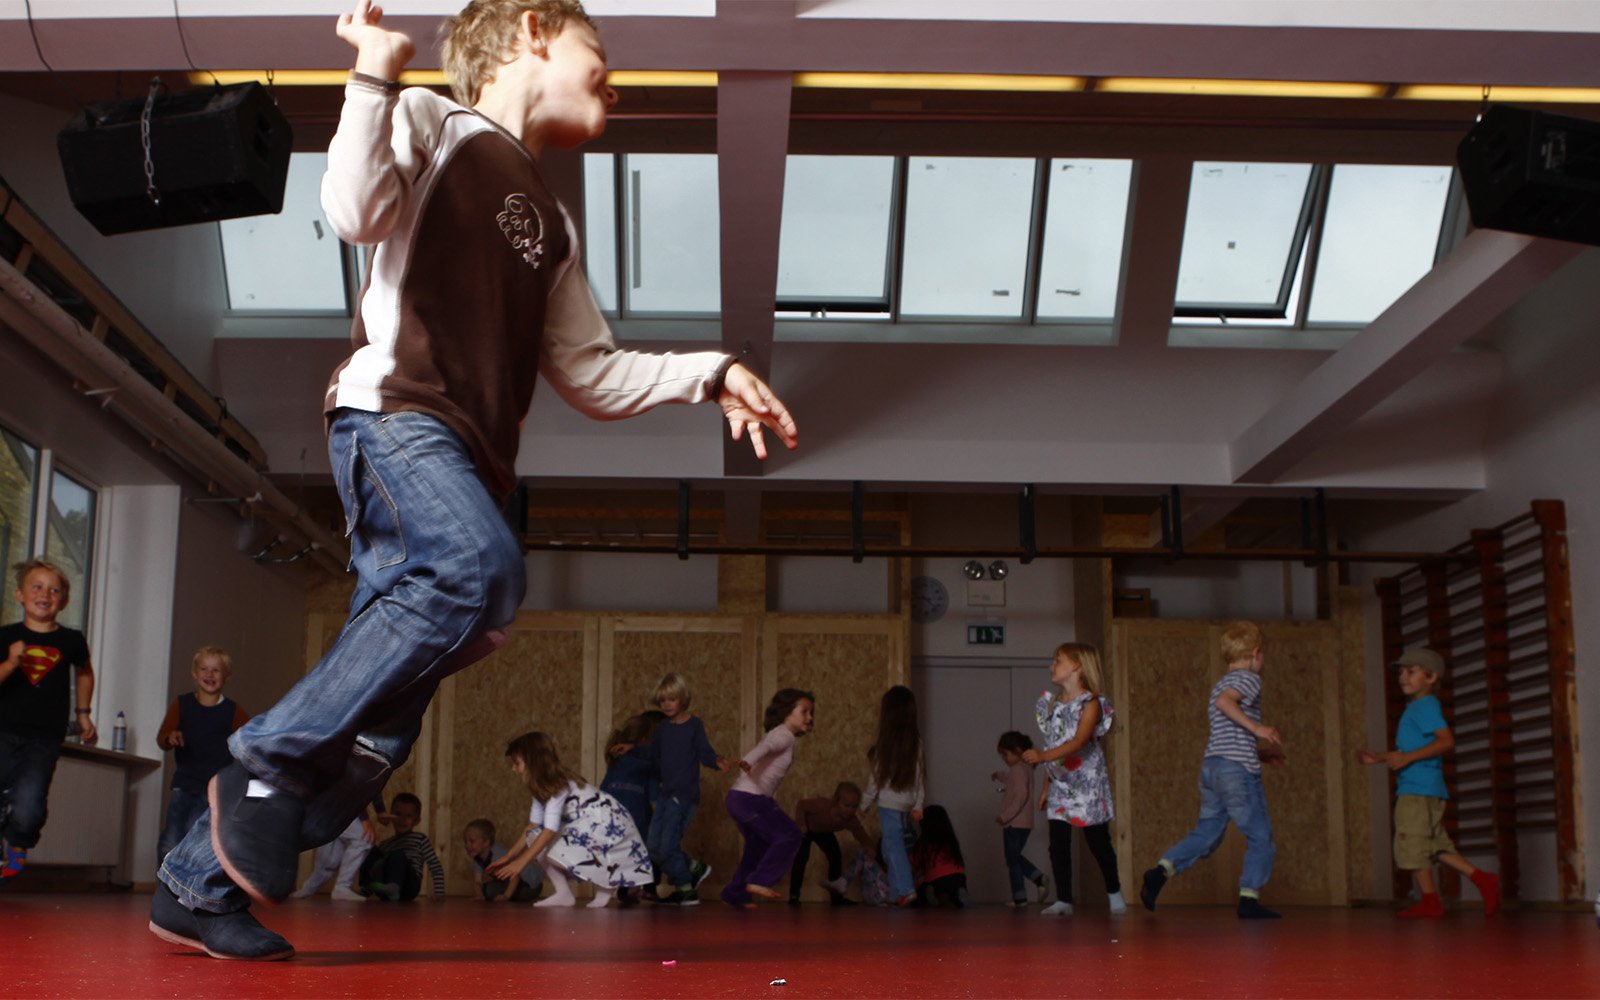 Young children playing in the school gym with roof skylights and roof ventilation